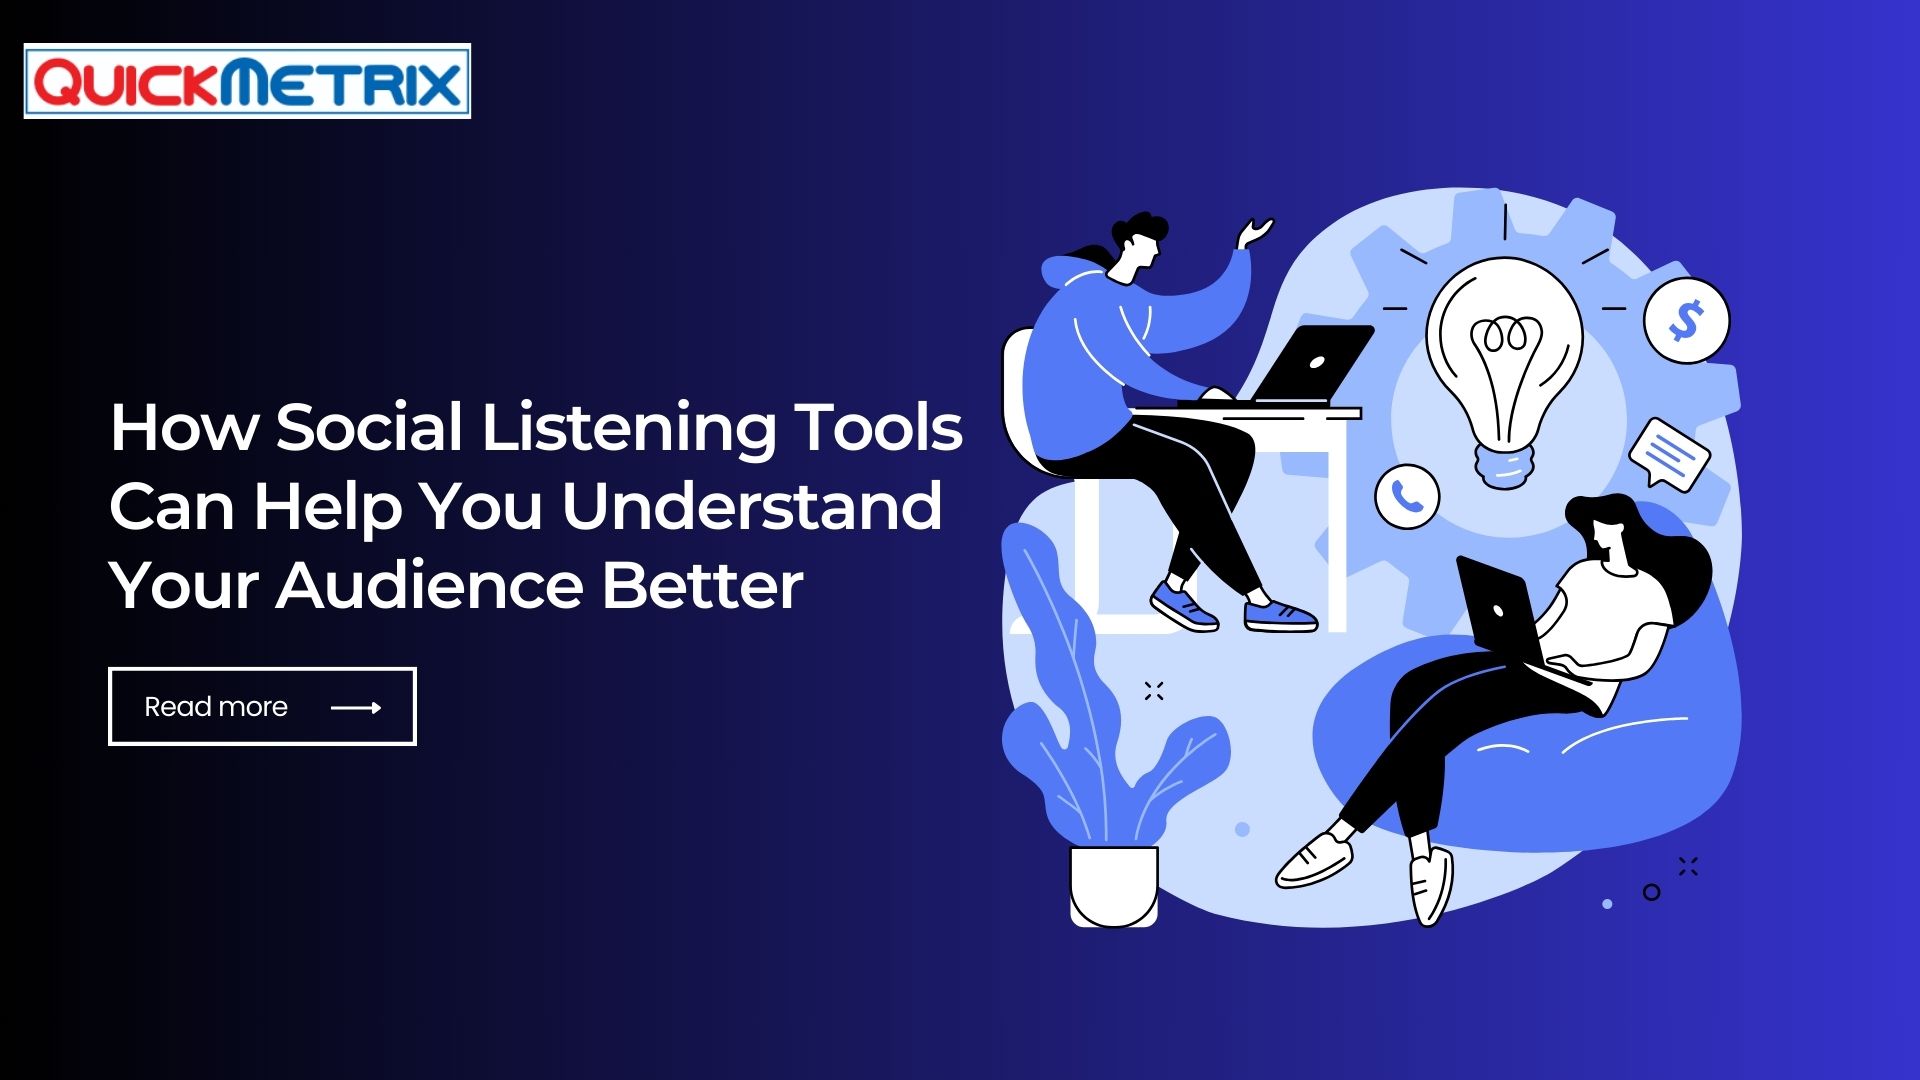 How Social Listening Tools Can Help You Understand Your Audience Better